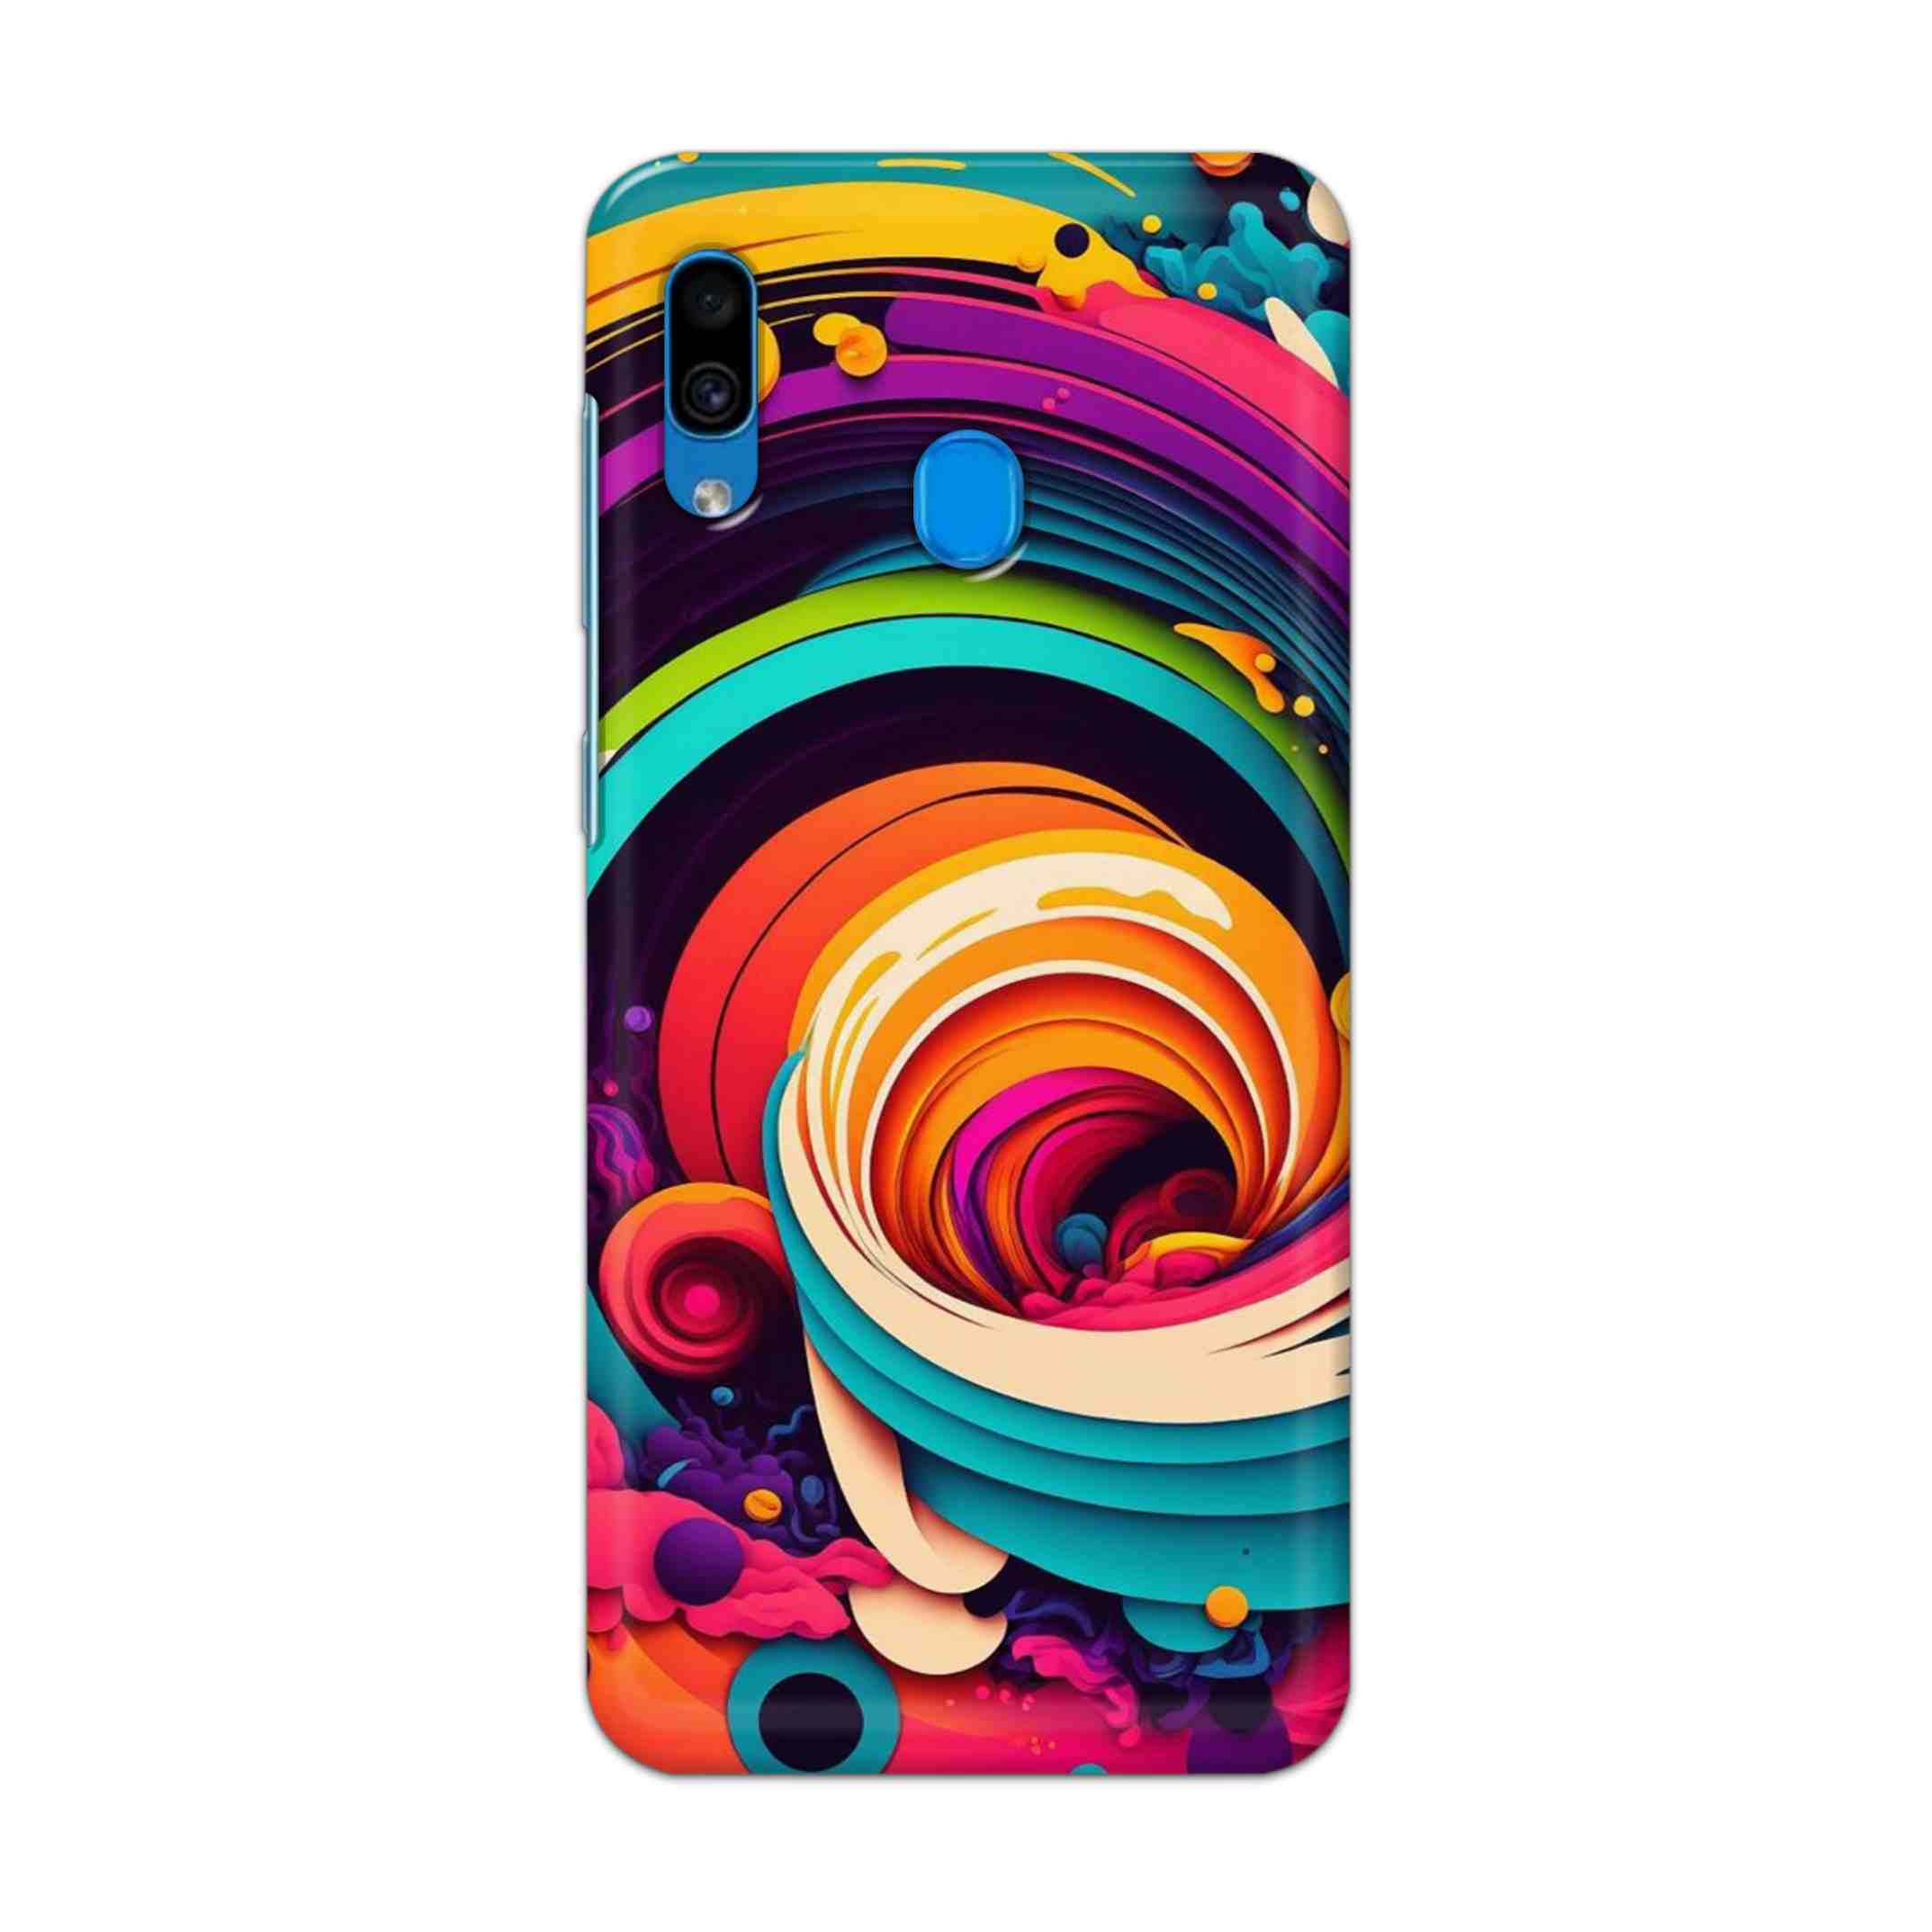 Buy Colour Circle Hard Back Mobile Phone Case Cover For Samsung Galaxy A30 Online